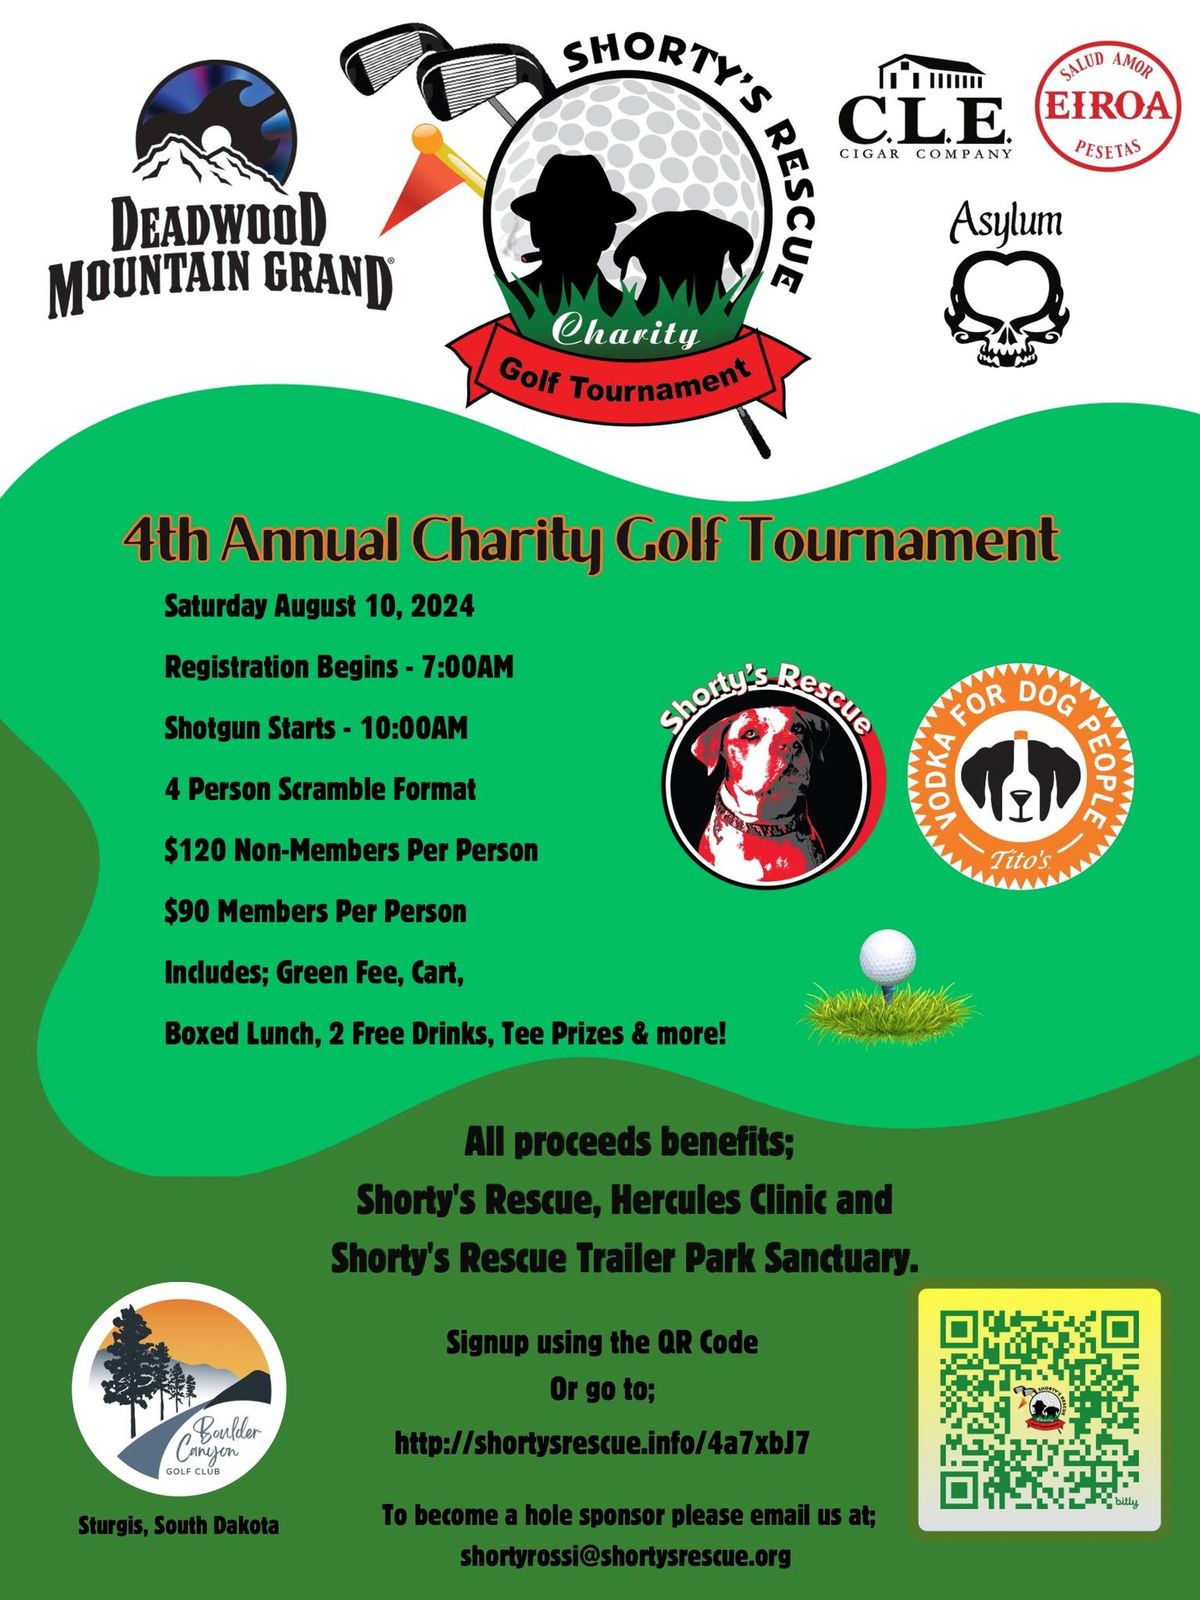 4th Annual Shorty's Rescue, Inc. Charity Golf Tournament